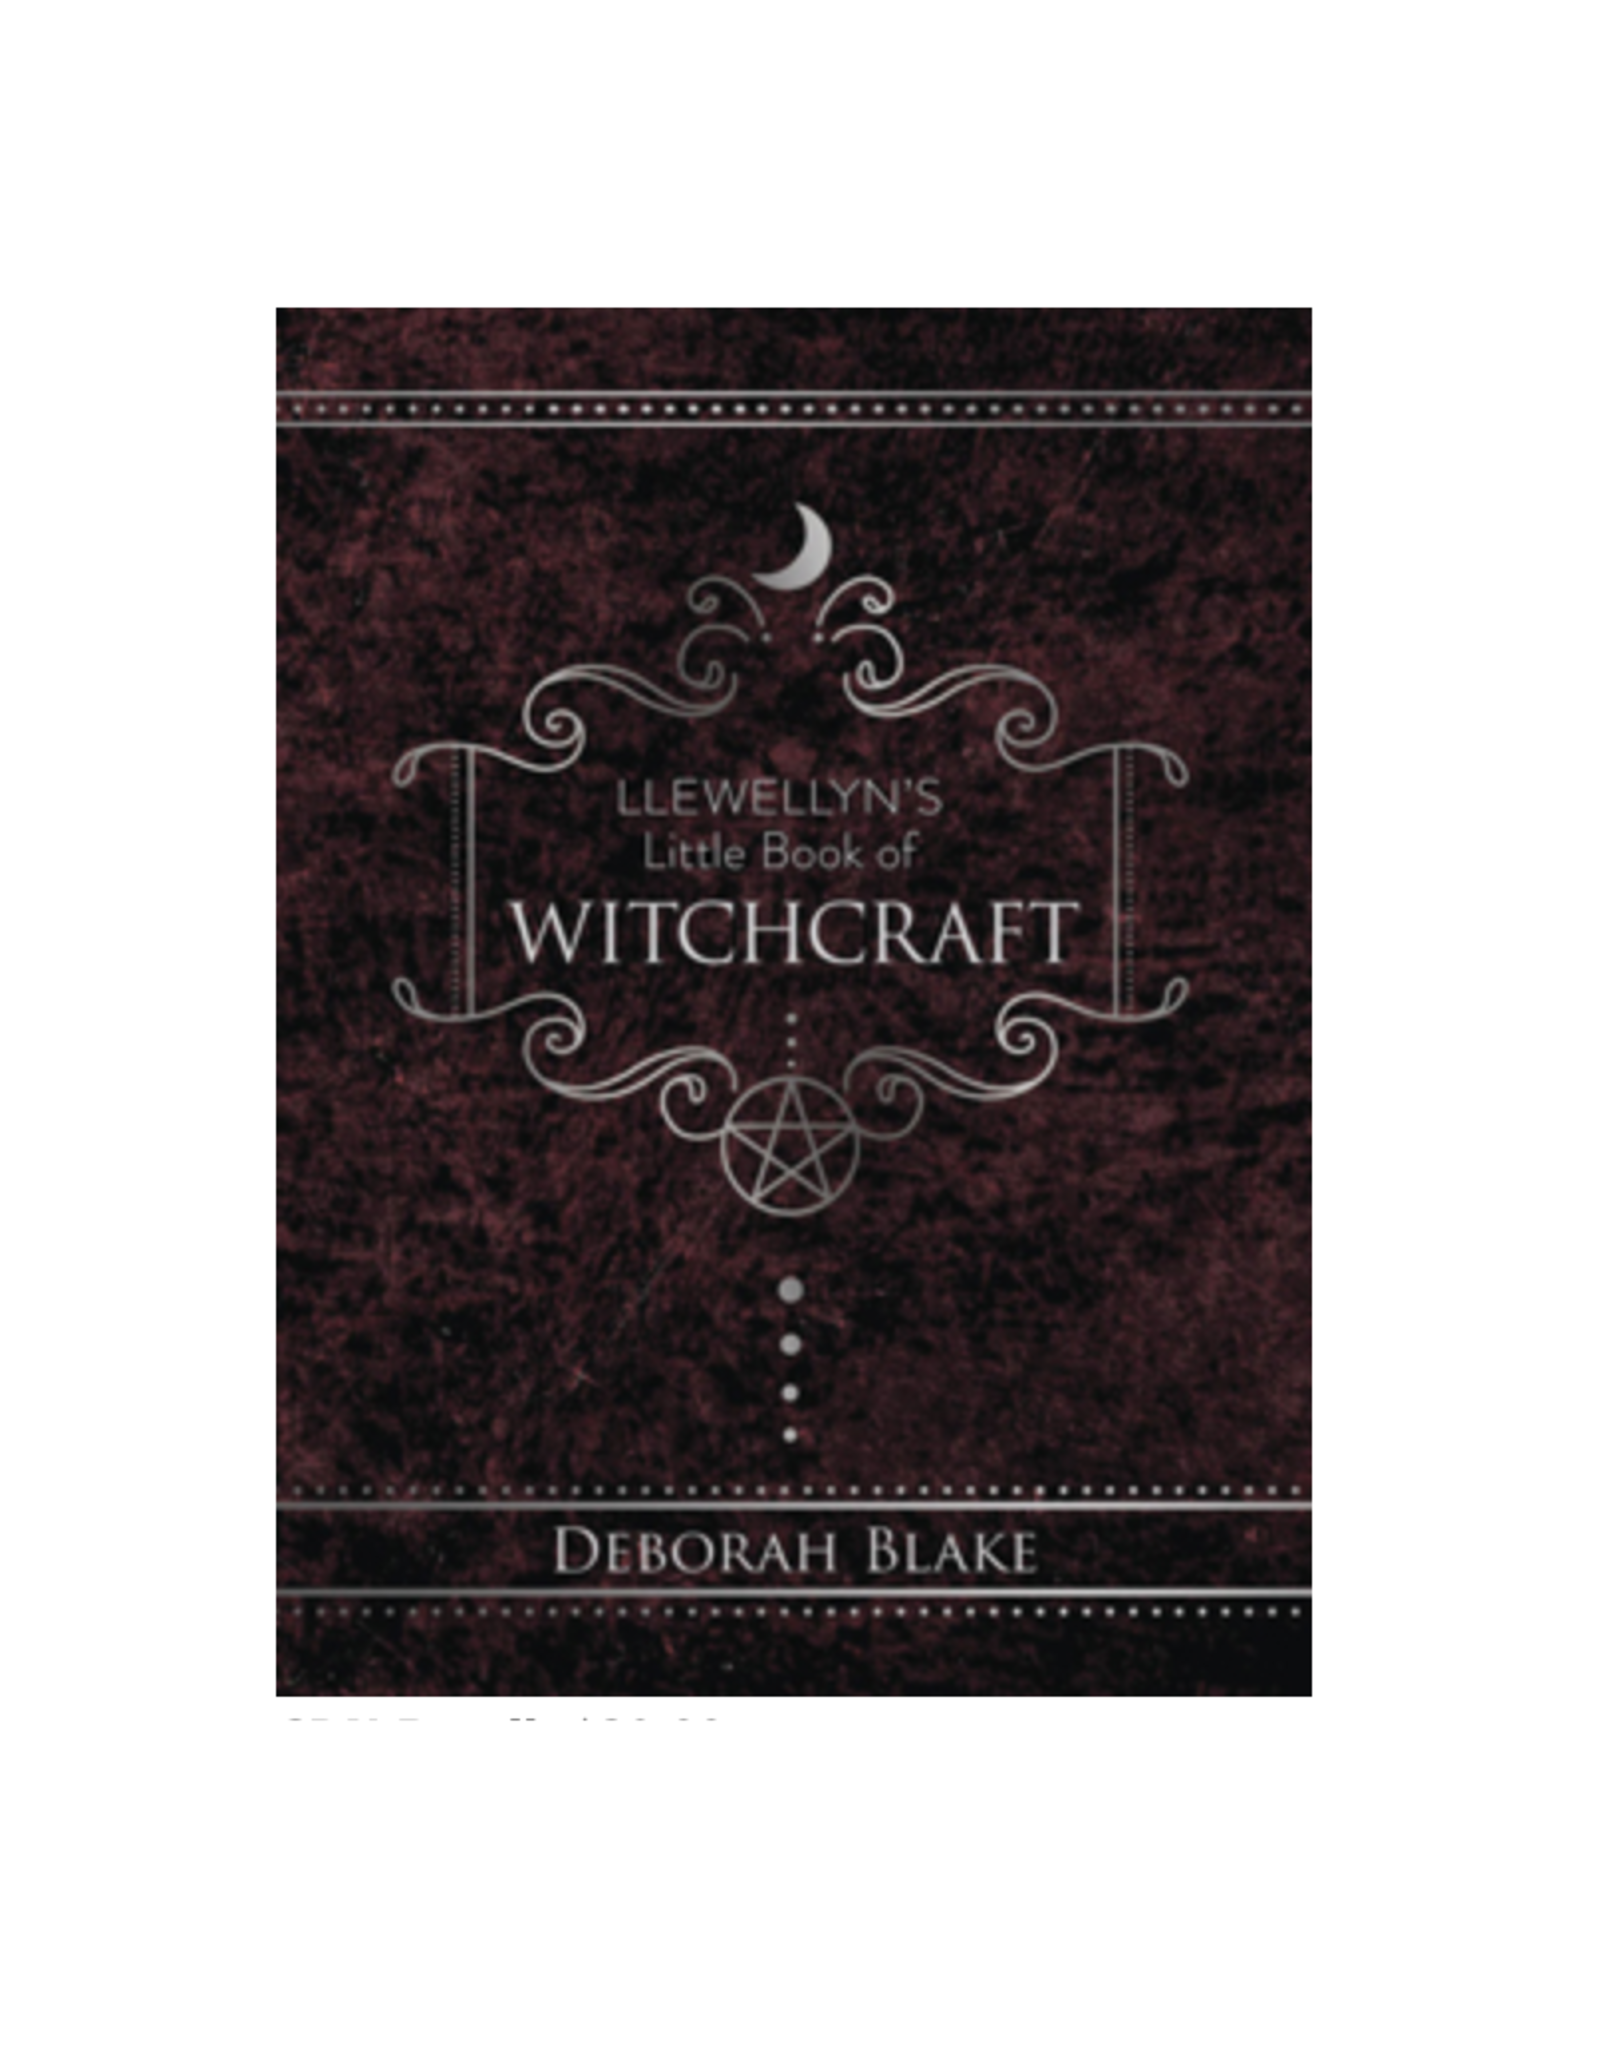 Llewellyn's Little Book of Witchcraft